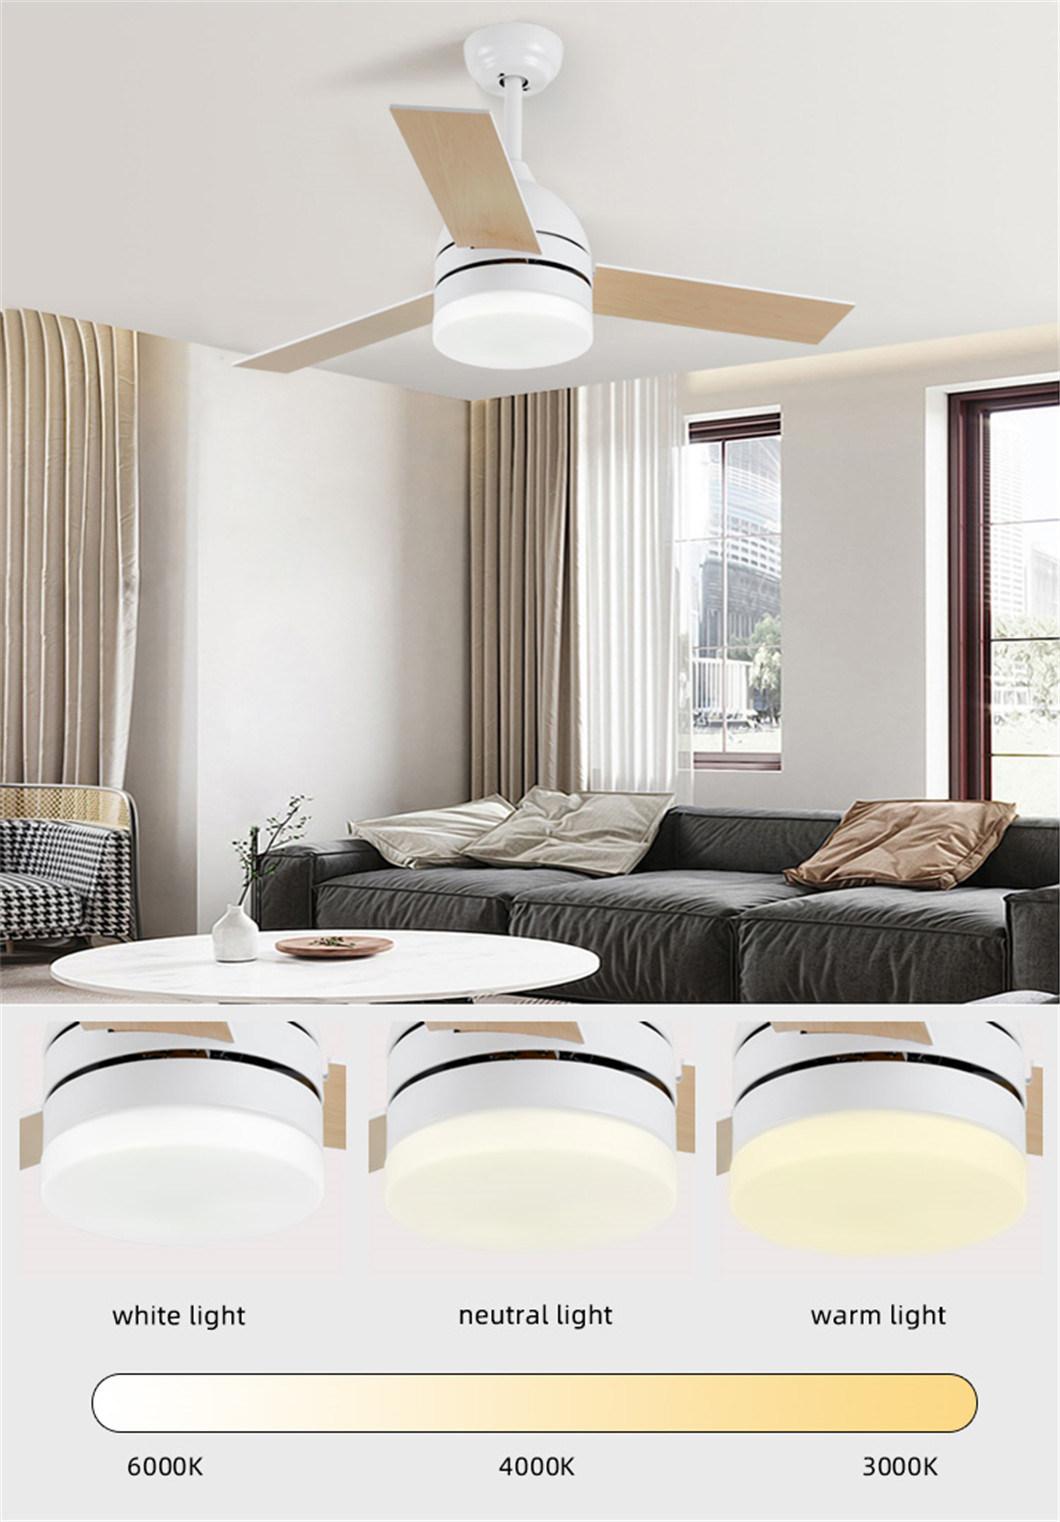 Hot Sale Energy Saving 110V 220V Remote Control Ceiling Light with Fan and Remote